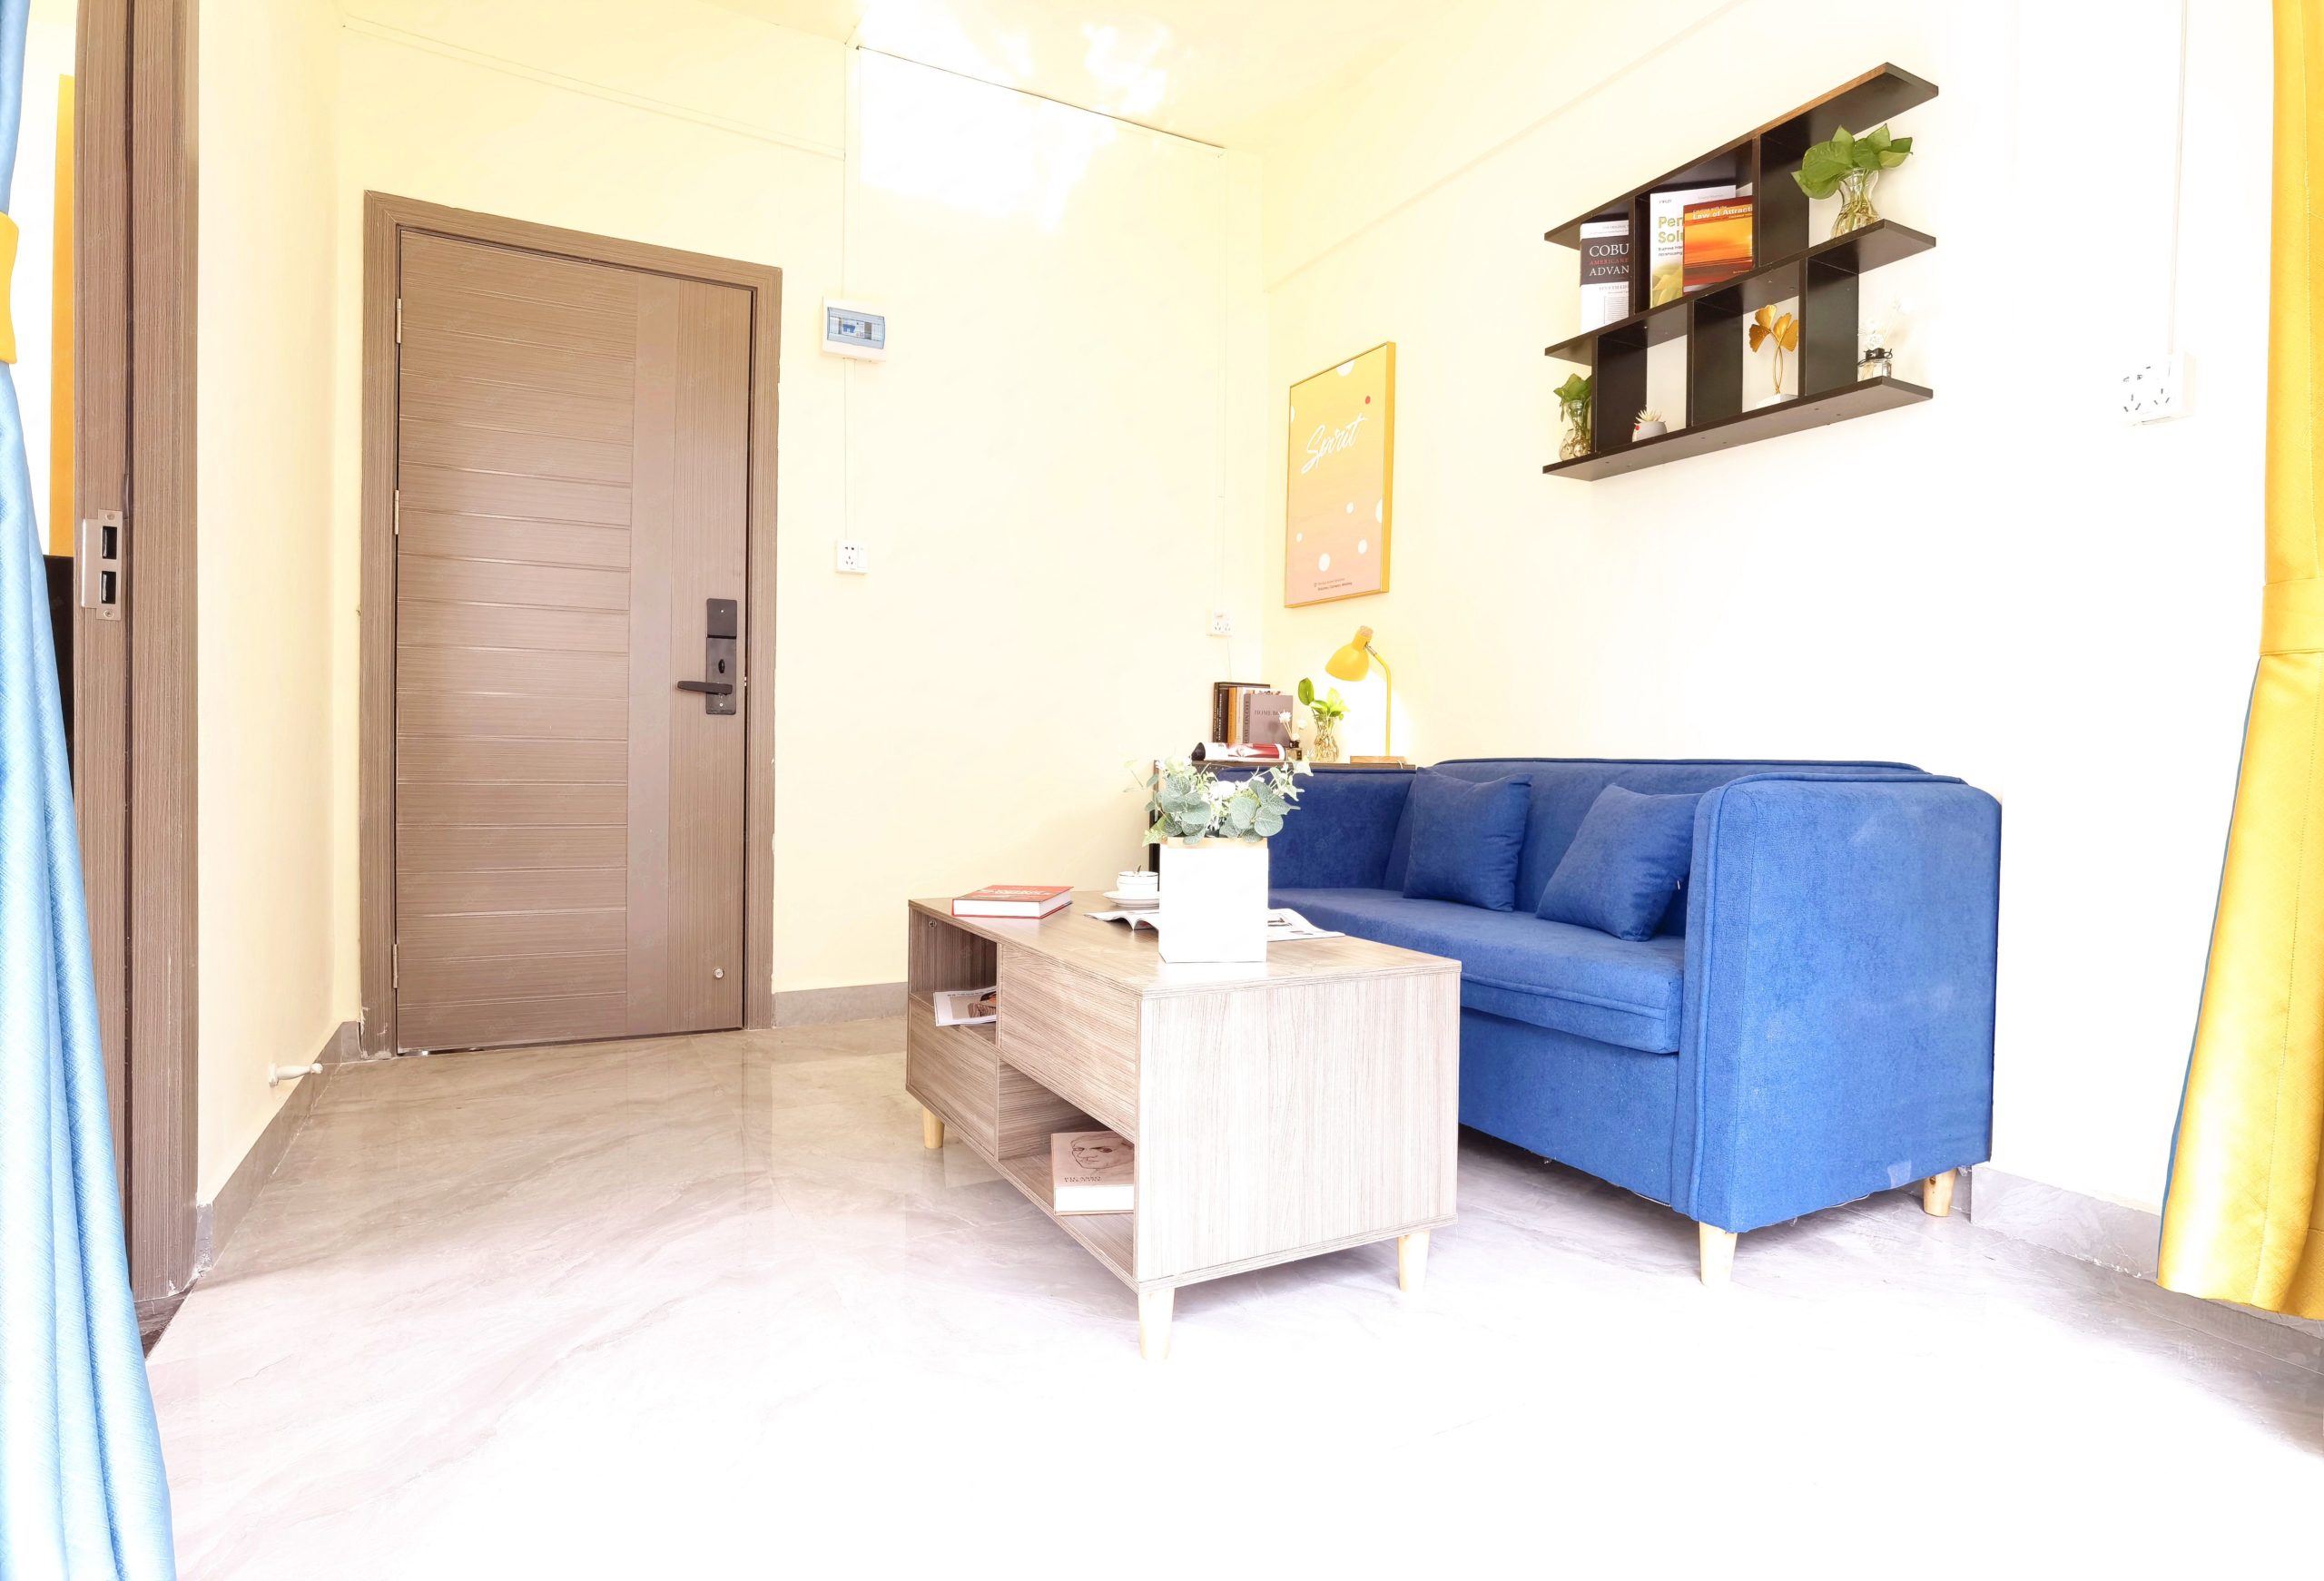 Featured image for “Futian nice studio for rent”